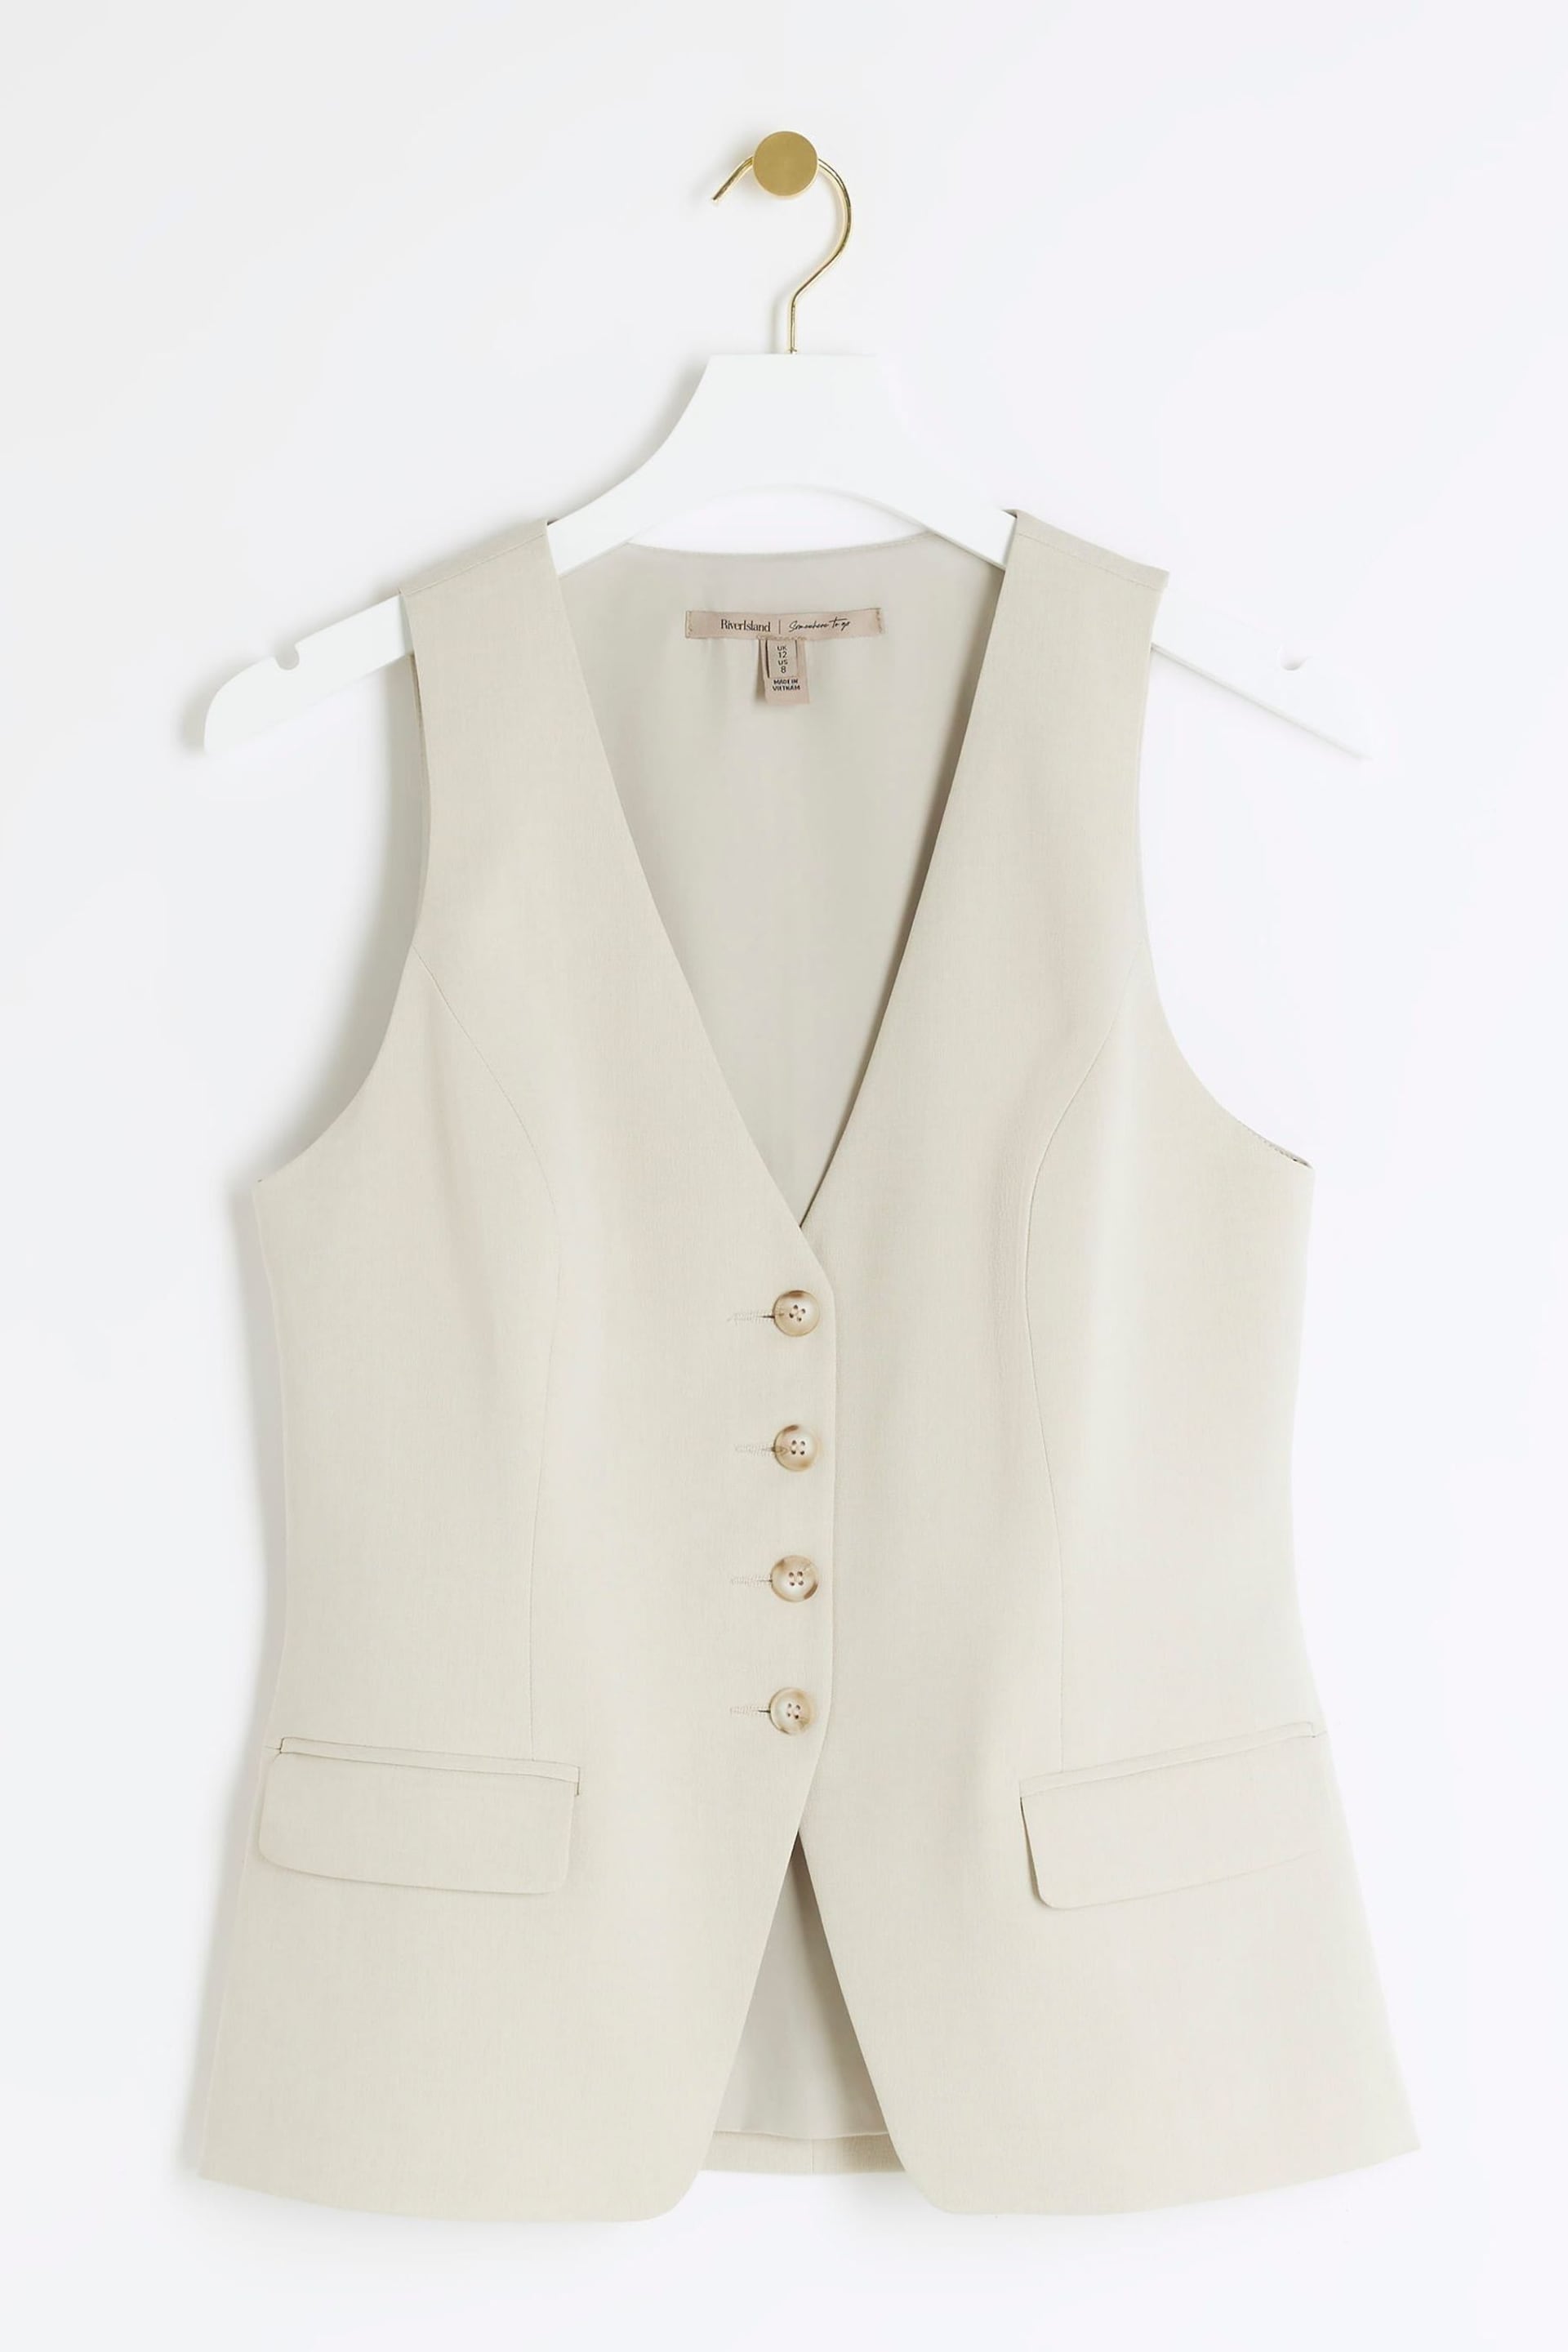 River Island Green Petite Fitted Longline Waistcoat - Image 5 of 6